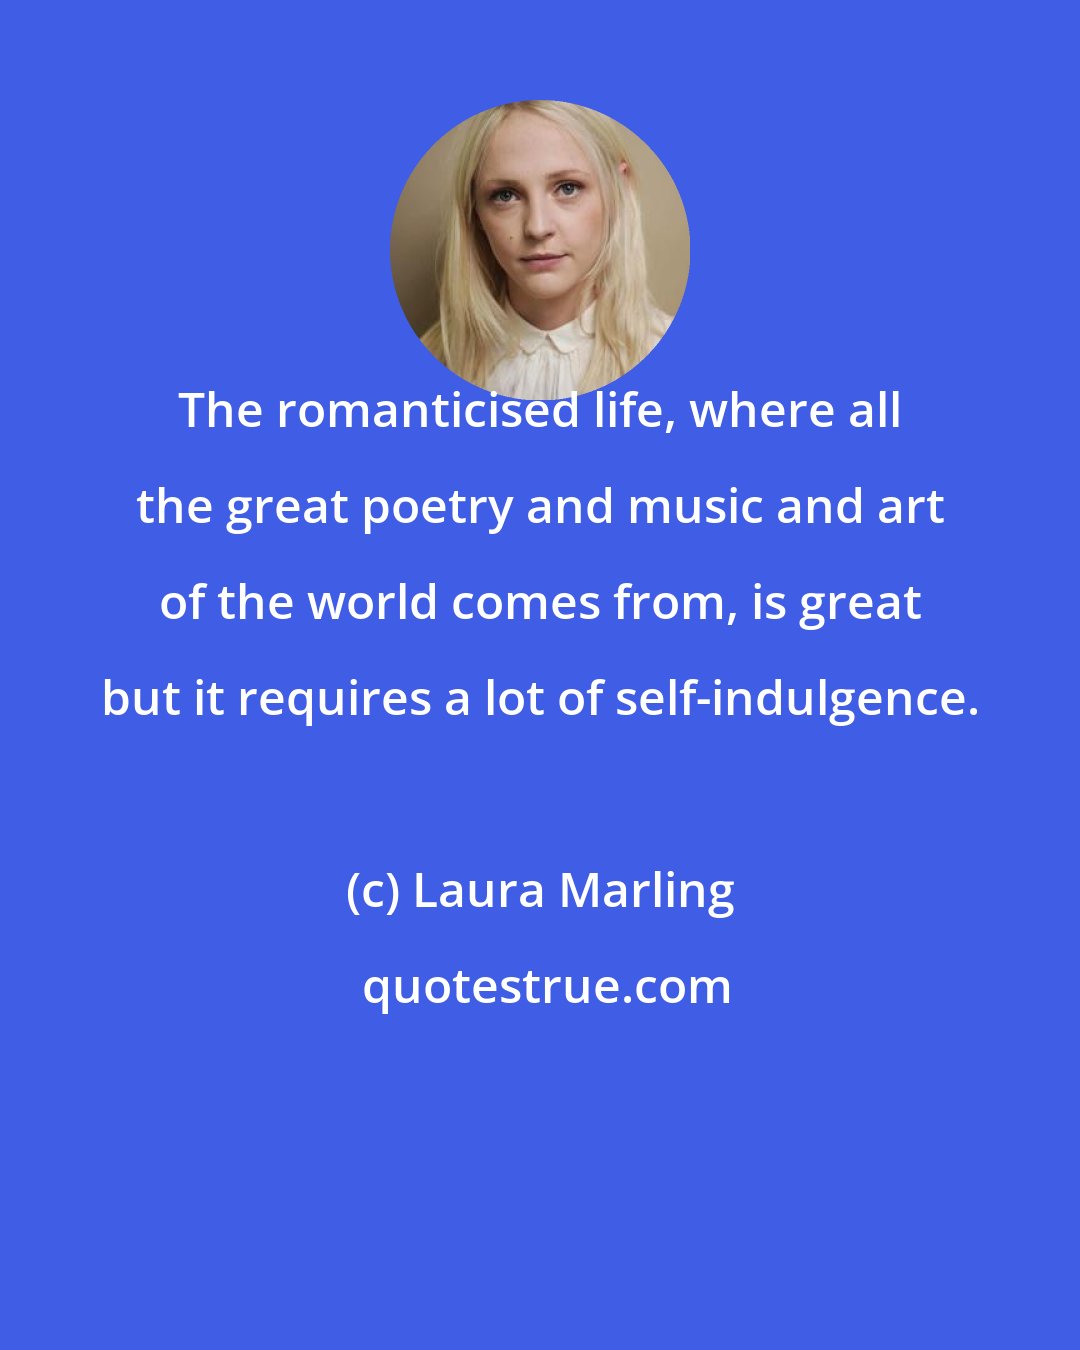 Laura Marling: The romanticised life, where all the great poetry and music and art of the world comes from, is great but it requires a lot of self-indulgence.